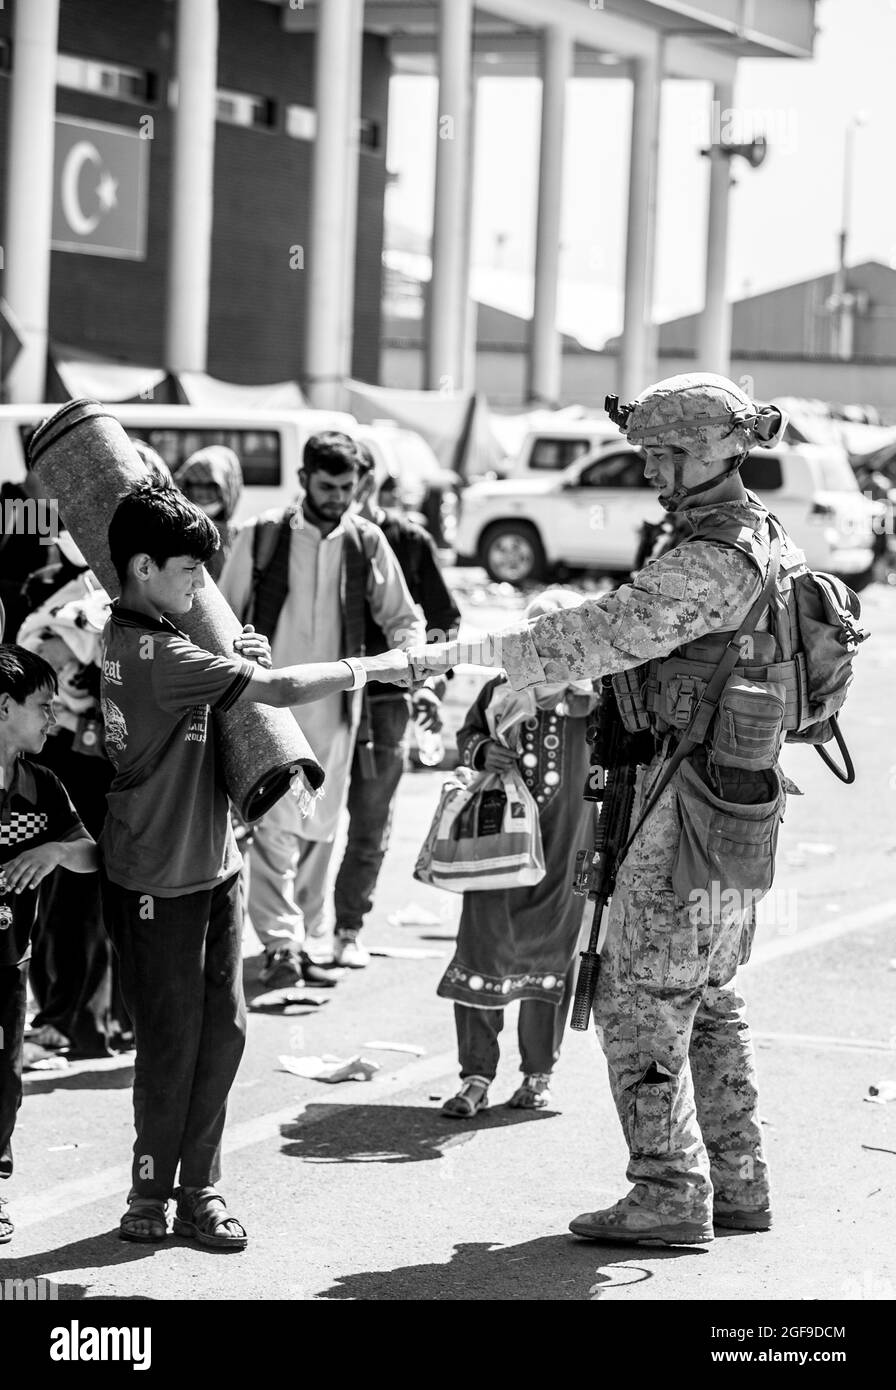 A Marine with Special Purpose Marine Air-Ground Task Force-Crisis Response-Central Command (SPMAGTF-CR-CC) shares a fist-bump with a child during an evacuation at Hamid Karzai International Airport, Kabul, Afghanistan, Aug. 24. U.S. service members are assisting the Department of State with an orderly drawdown of designated personnel in Afghanistan. (U.S. Marine Corps photo by Sgt. Samuel Ruiz). Stock Photo